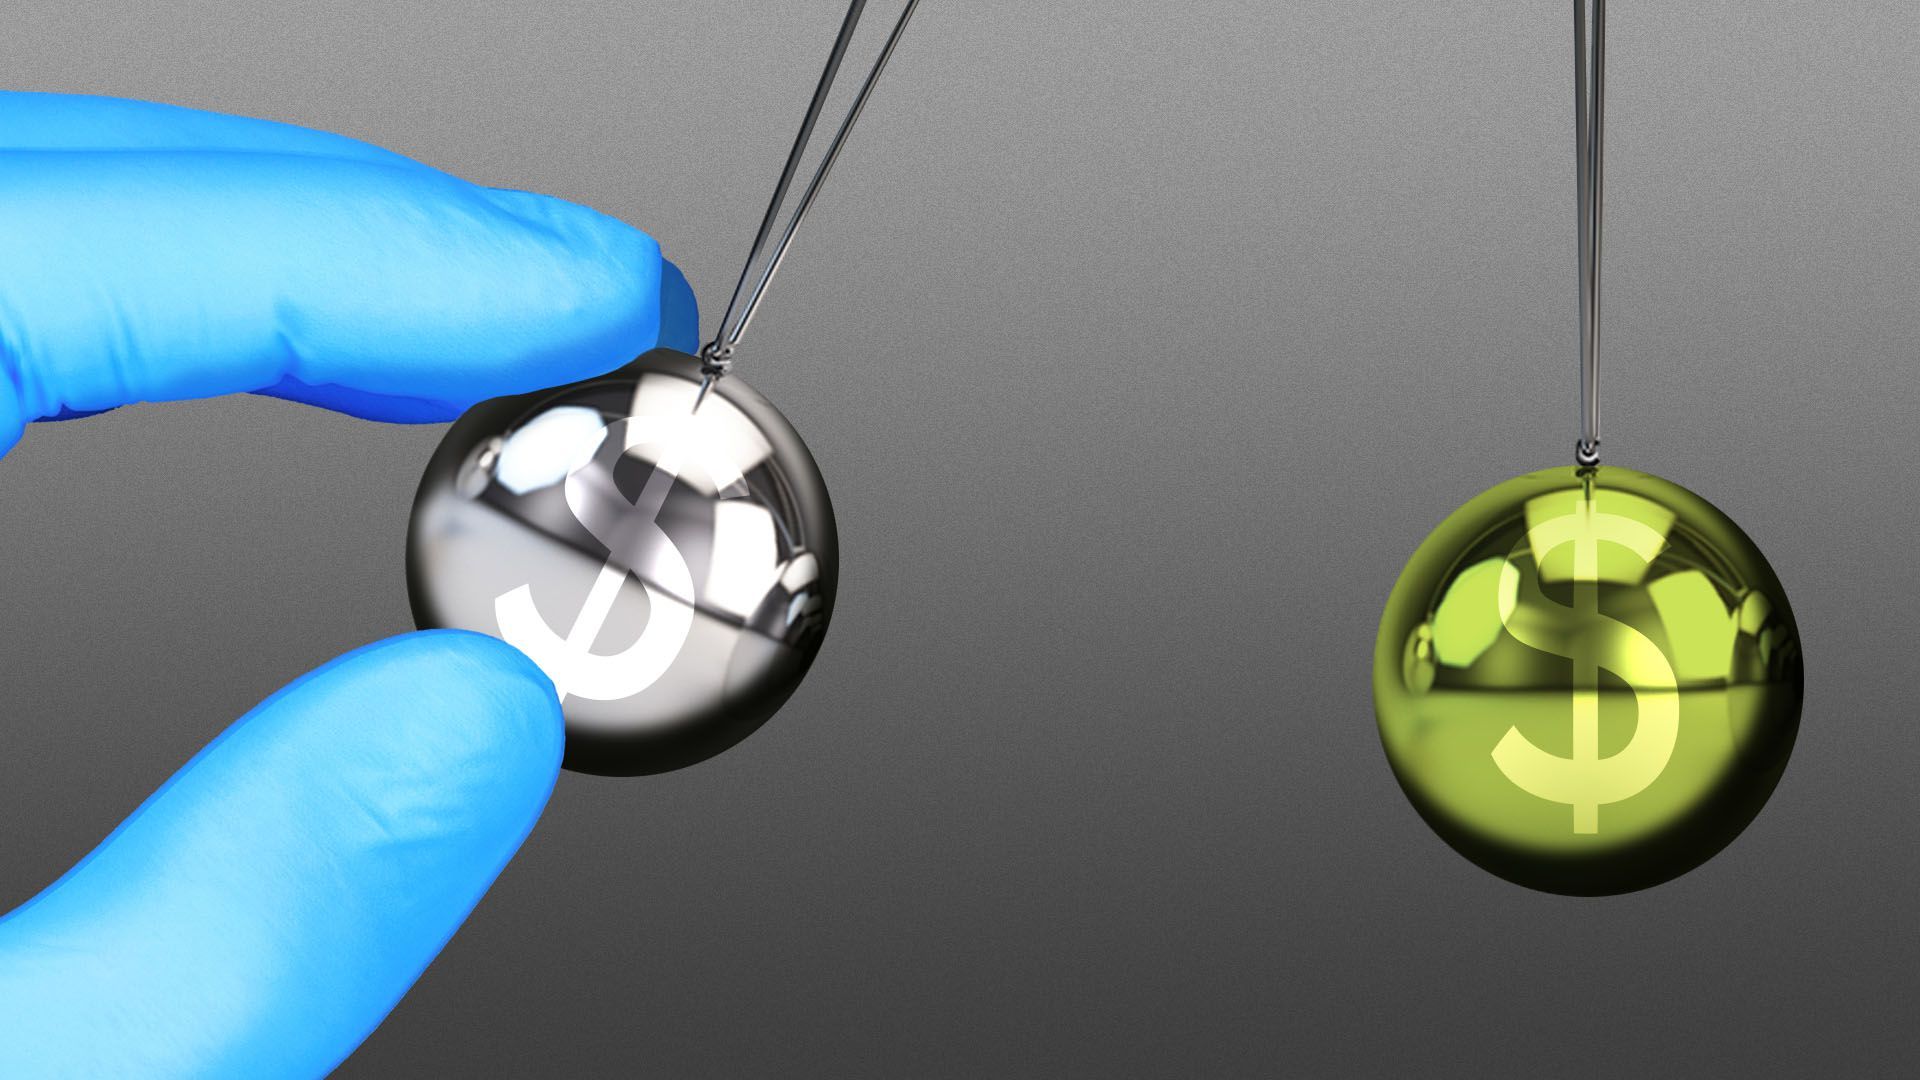 Illustration of hands in medical gloves holding a ball on a Newton's cradle with a dollar sign on it